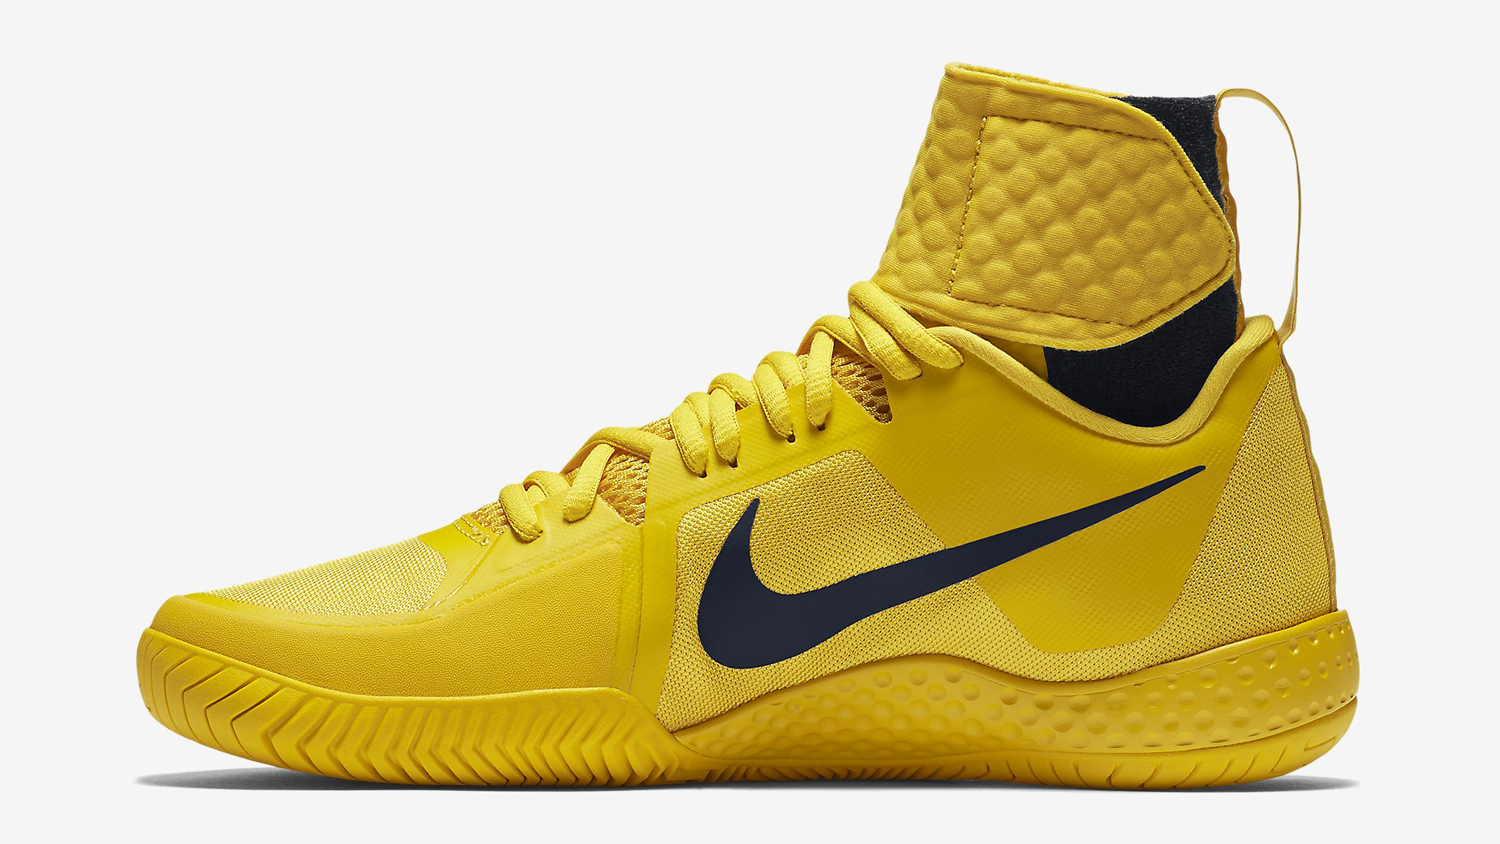 Nike Made Bruce Lee Sneakers for Serena 